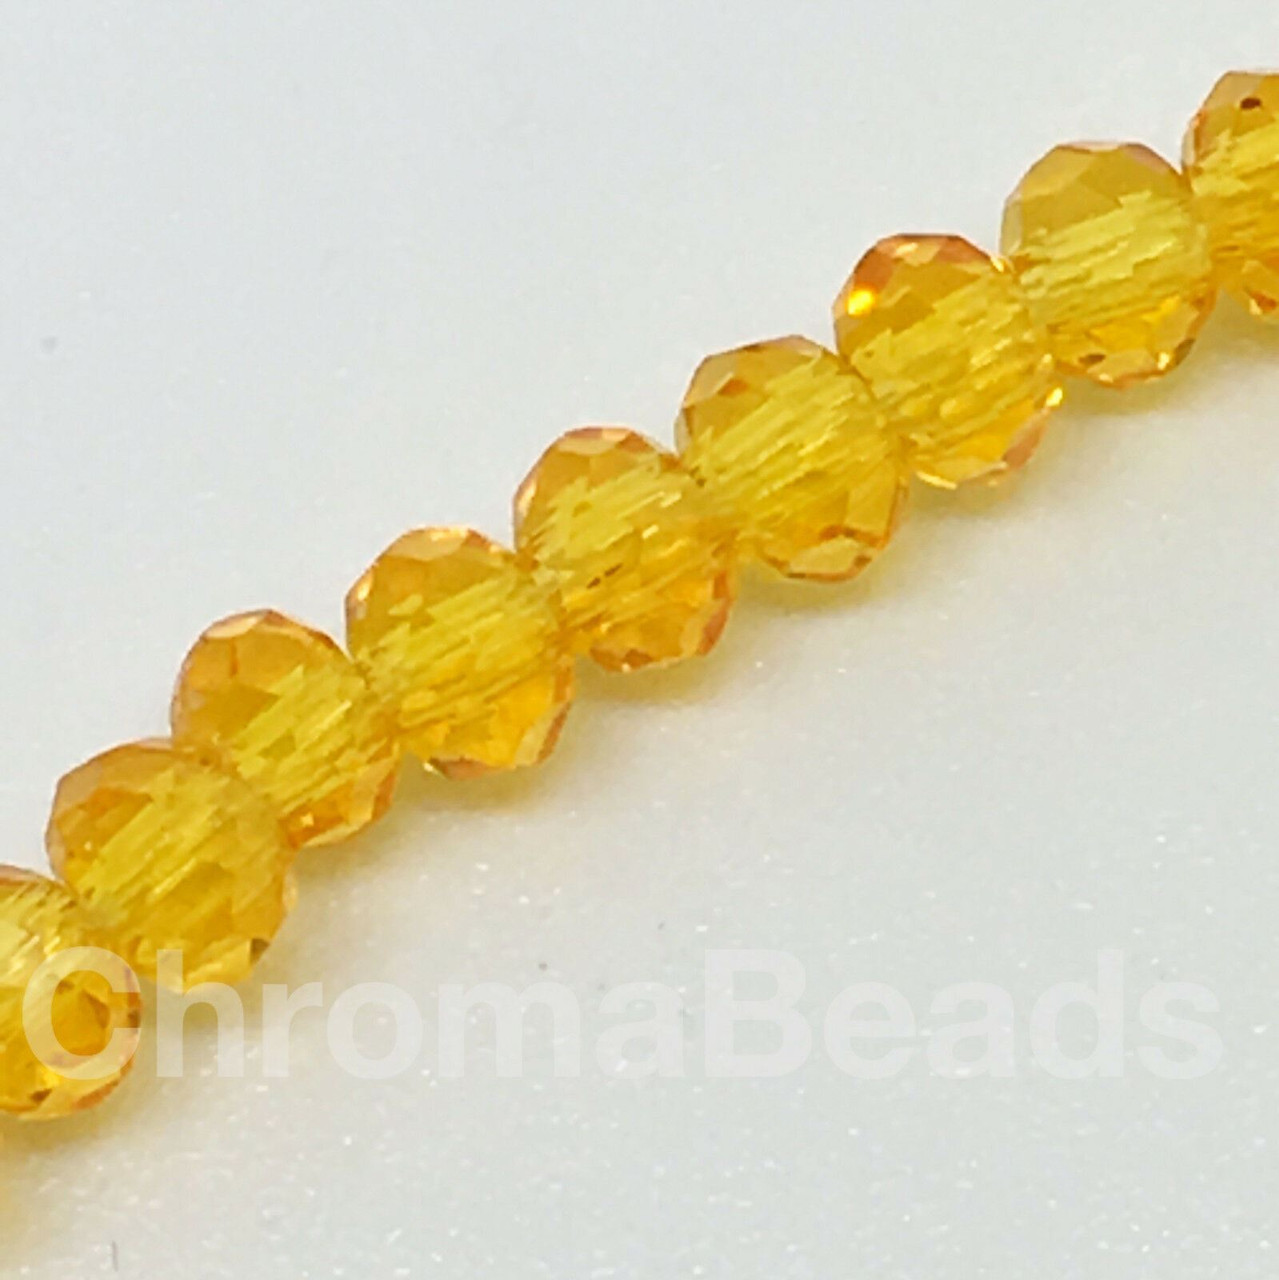 3x2mm Glass Rondelle beads - SUNSHINE YELLOW - approx 15" strand (approx 200 beads)